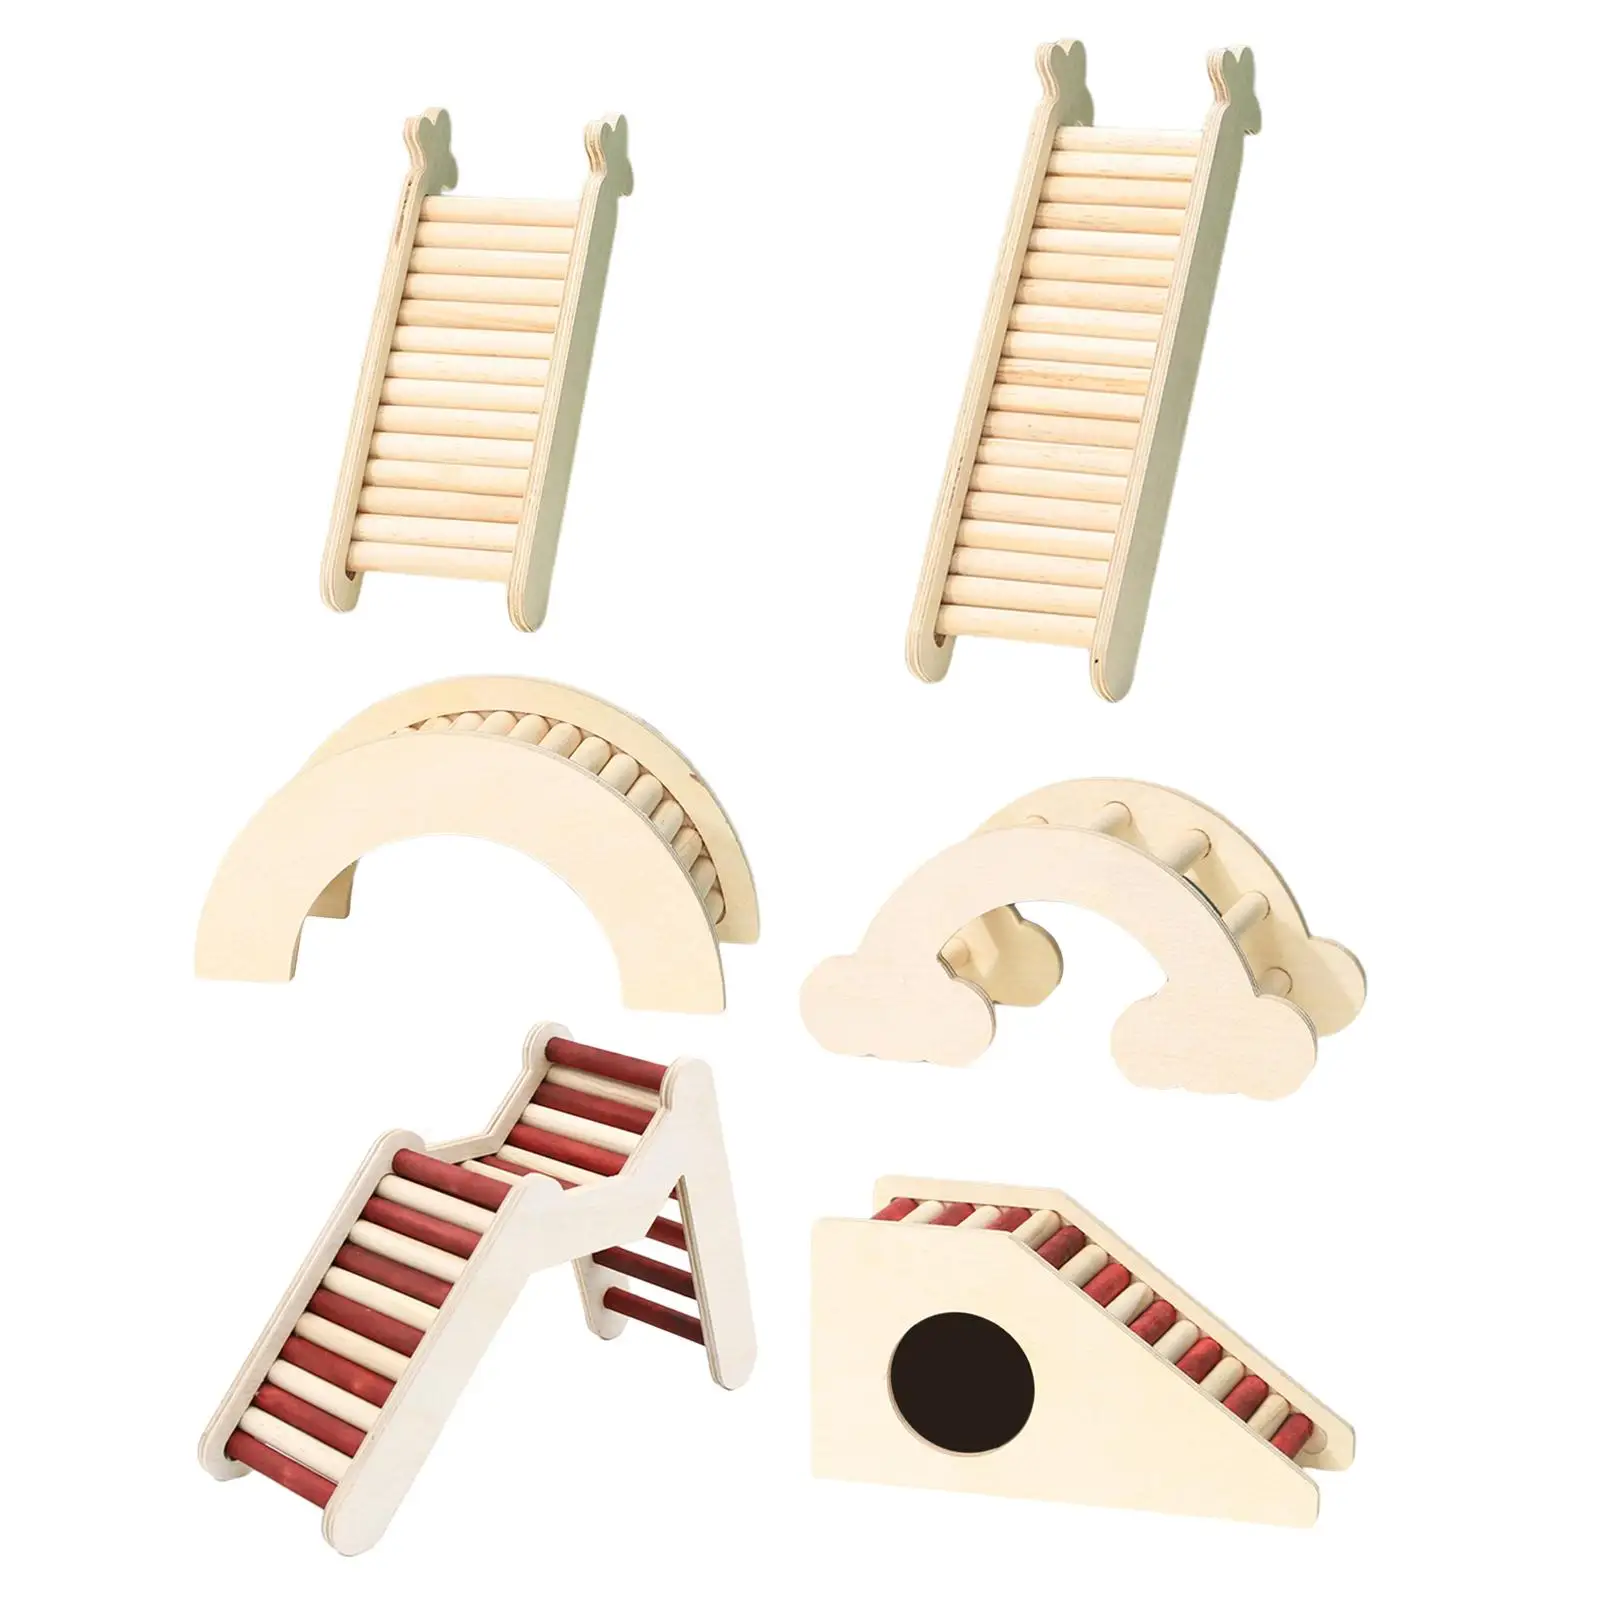 Hamster Climbing Toy Wooden Bridge Ladder for Hamsters Gerbils Mice and Small Animals